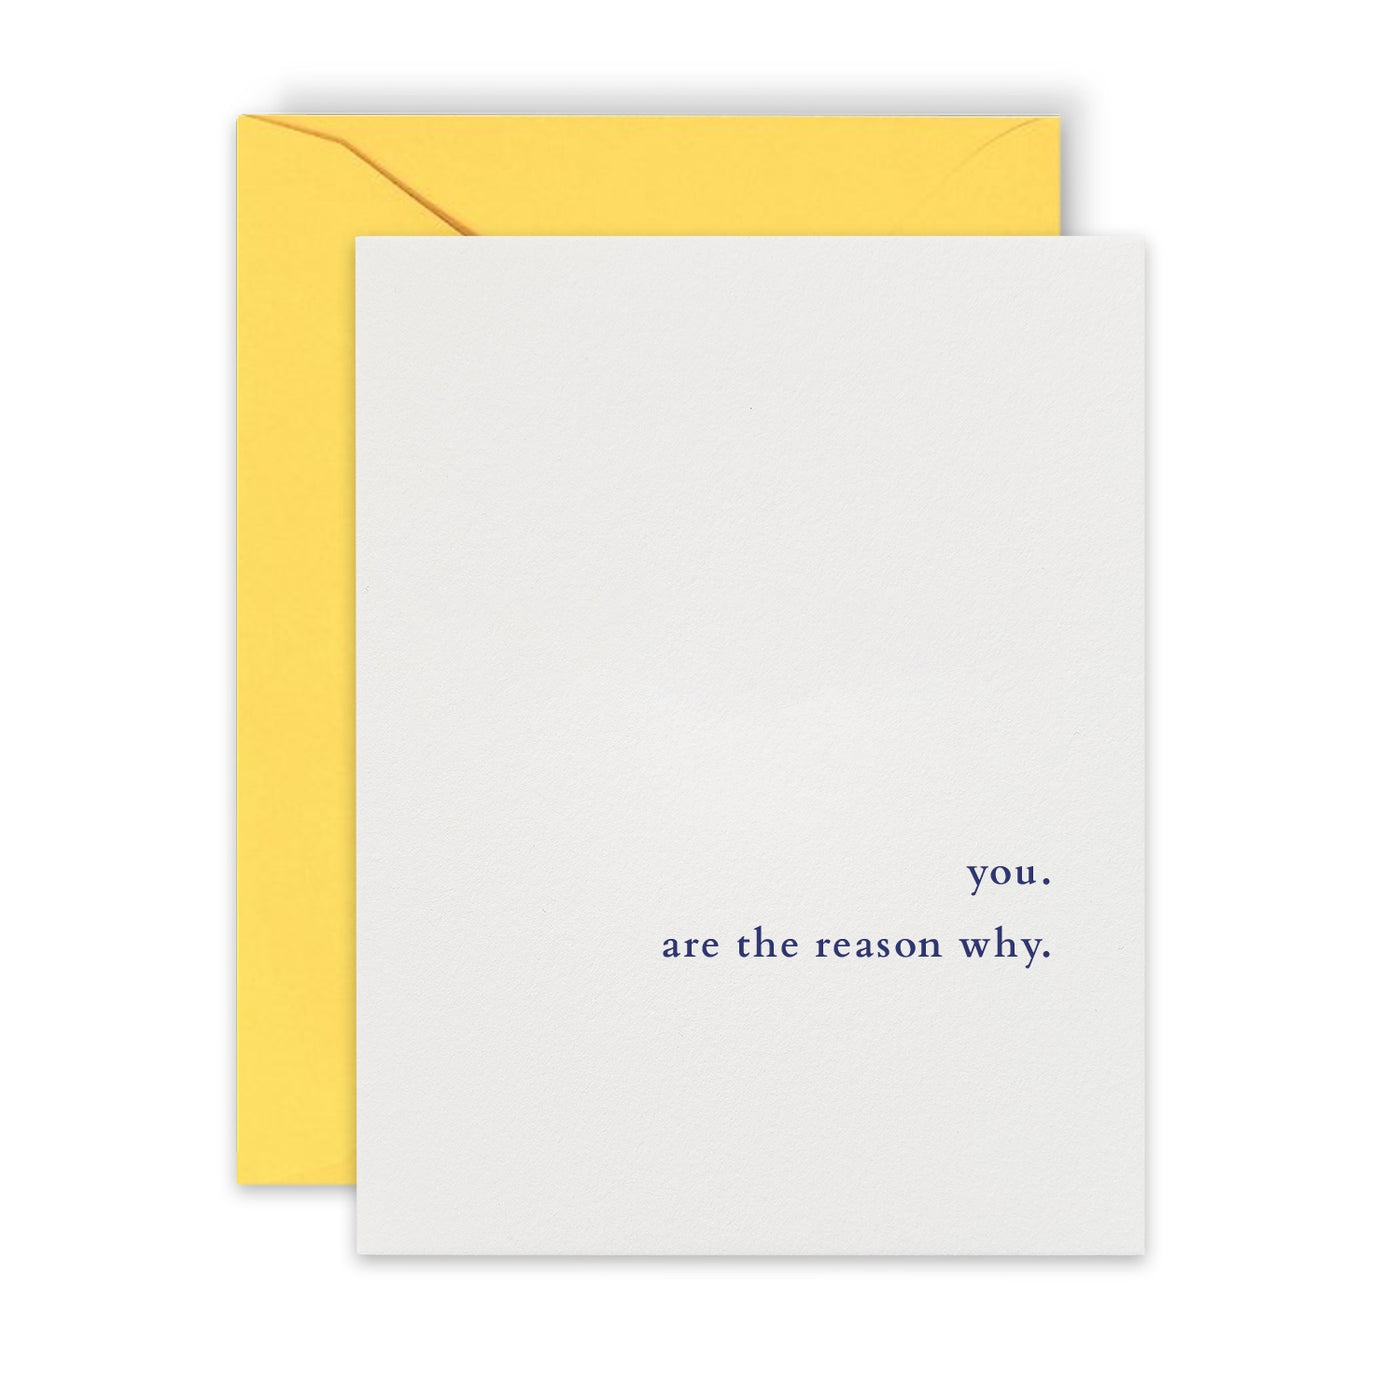 Beknown greeting card in collaboration with House of Pride, inspired by words from Dr Ronx, you. are the reason why.